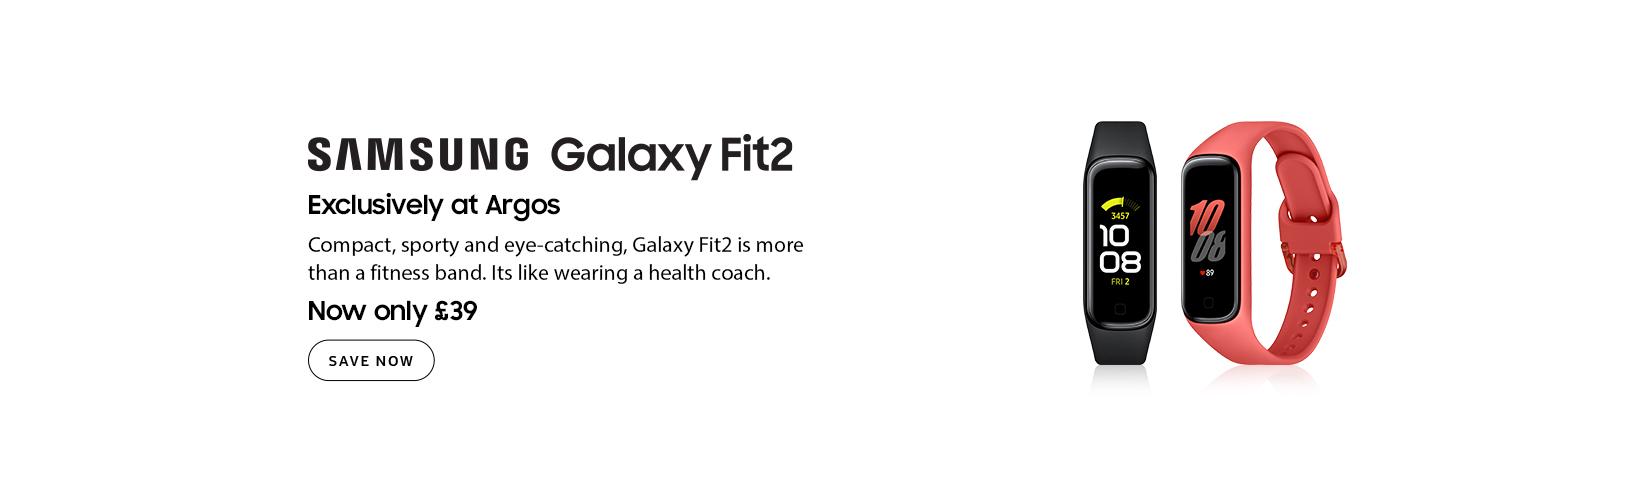 Samsung Galaxy Fit2. Exclusively at Argos. Compact, Sporty and eye-catching, Galaxy Fit2 is more than a fitness band. Its like wearing a health coach. Now only £39.